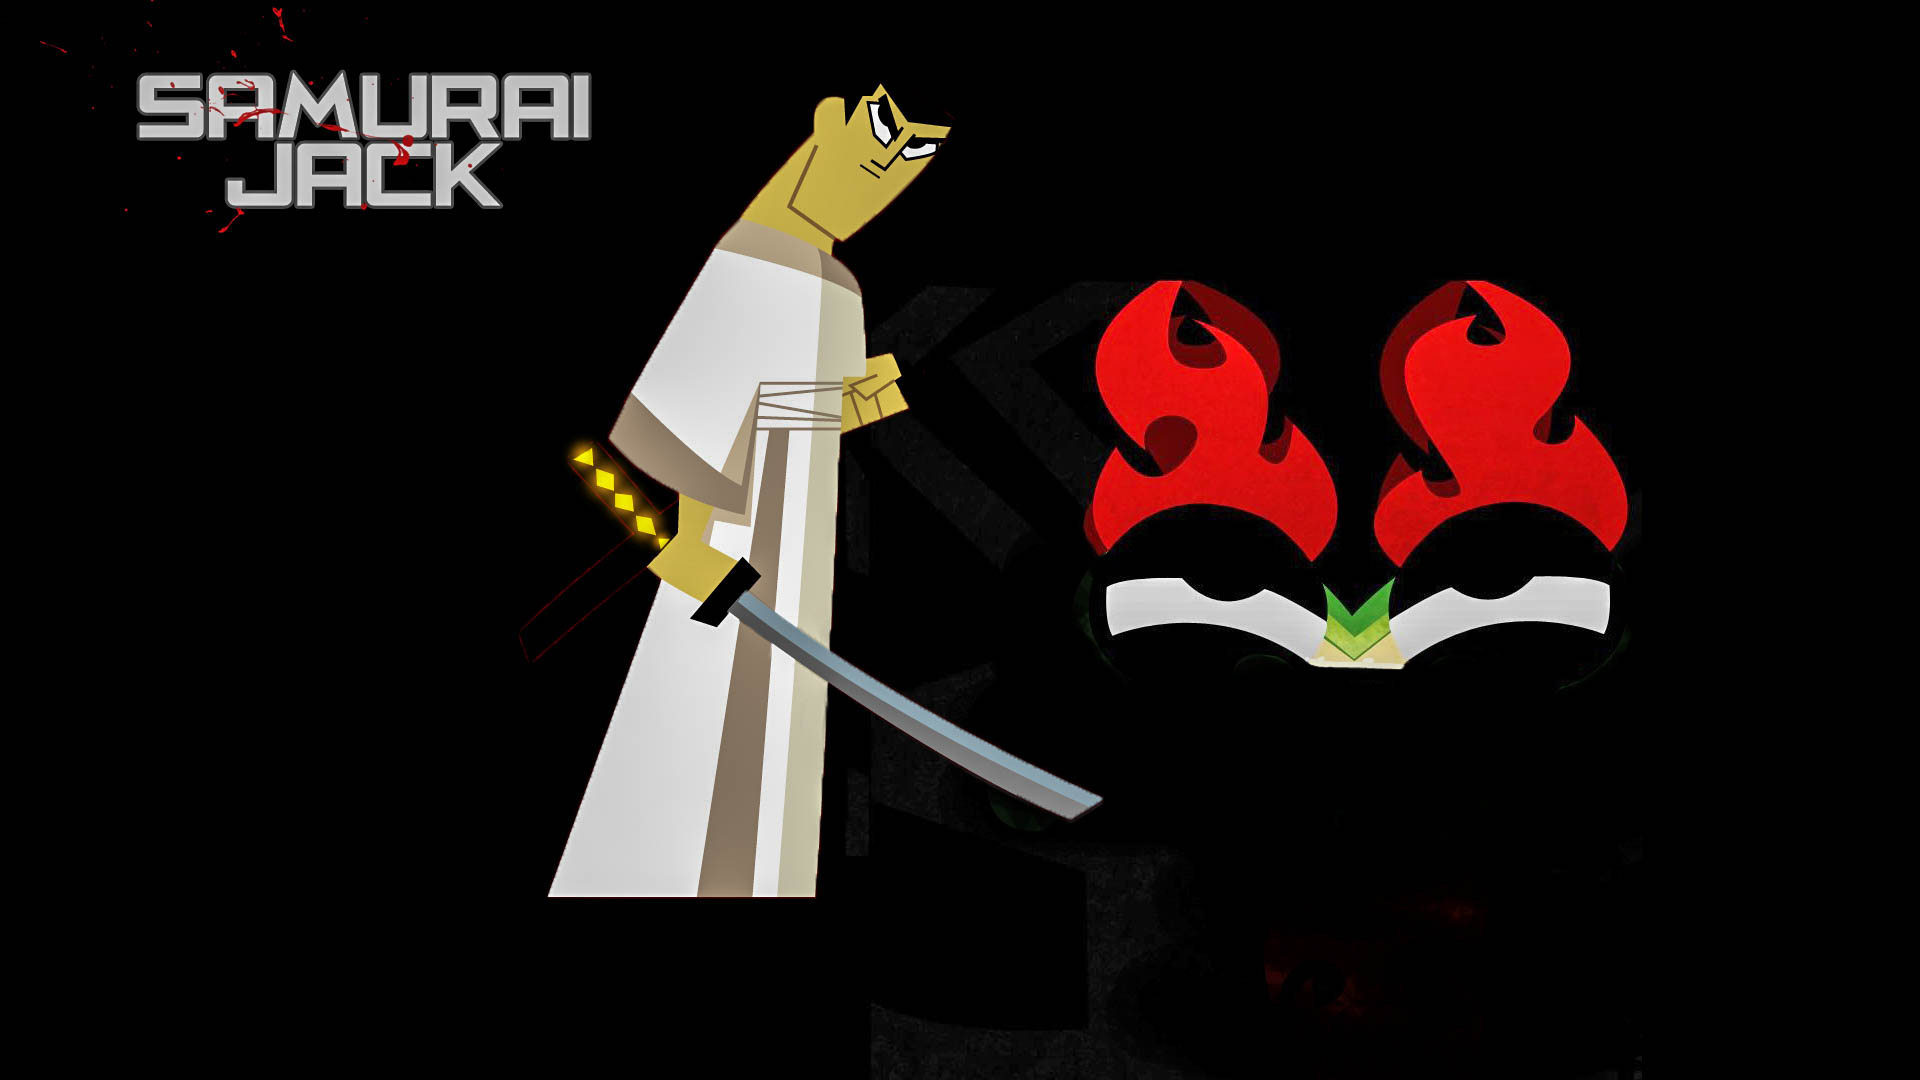 Samurai Jack Wallpaper Image In High Quality All HD